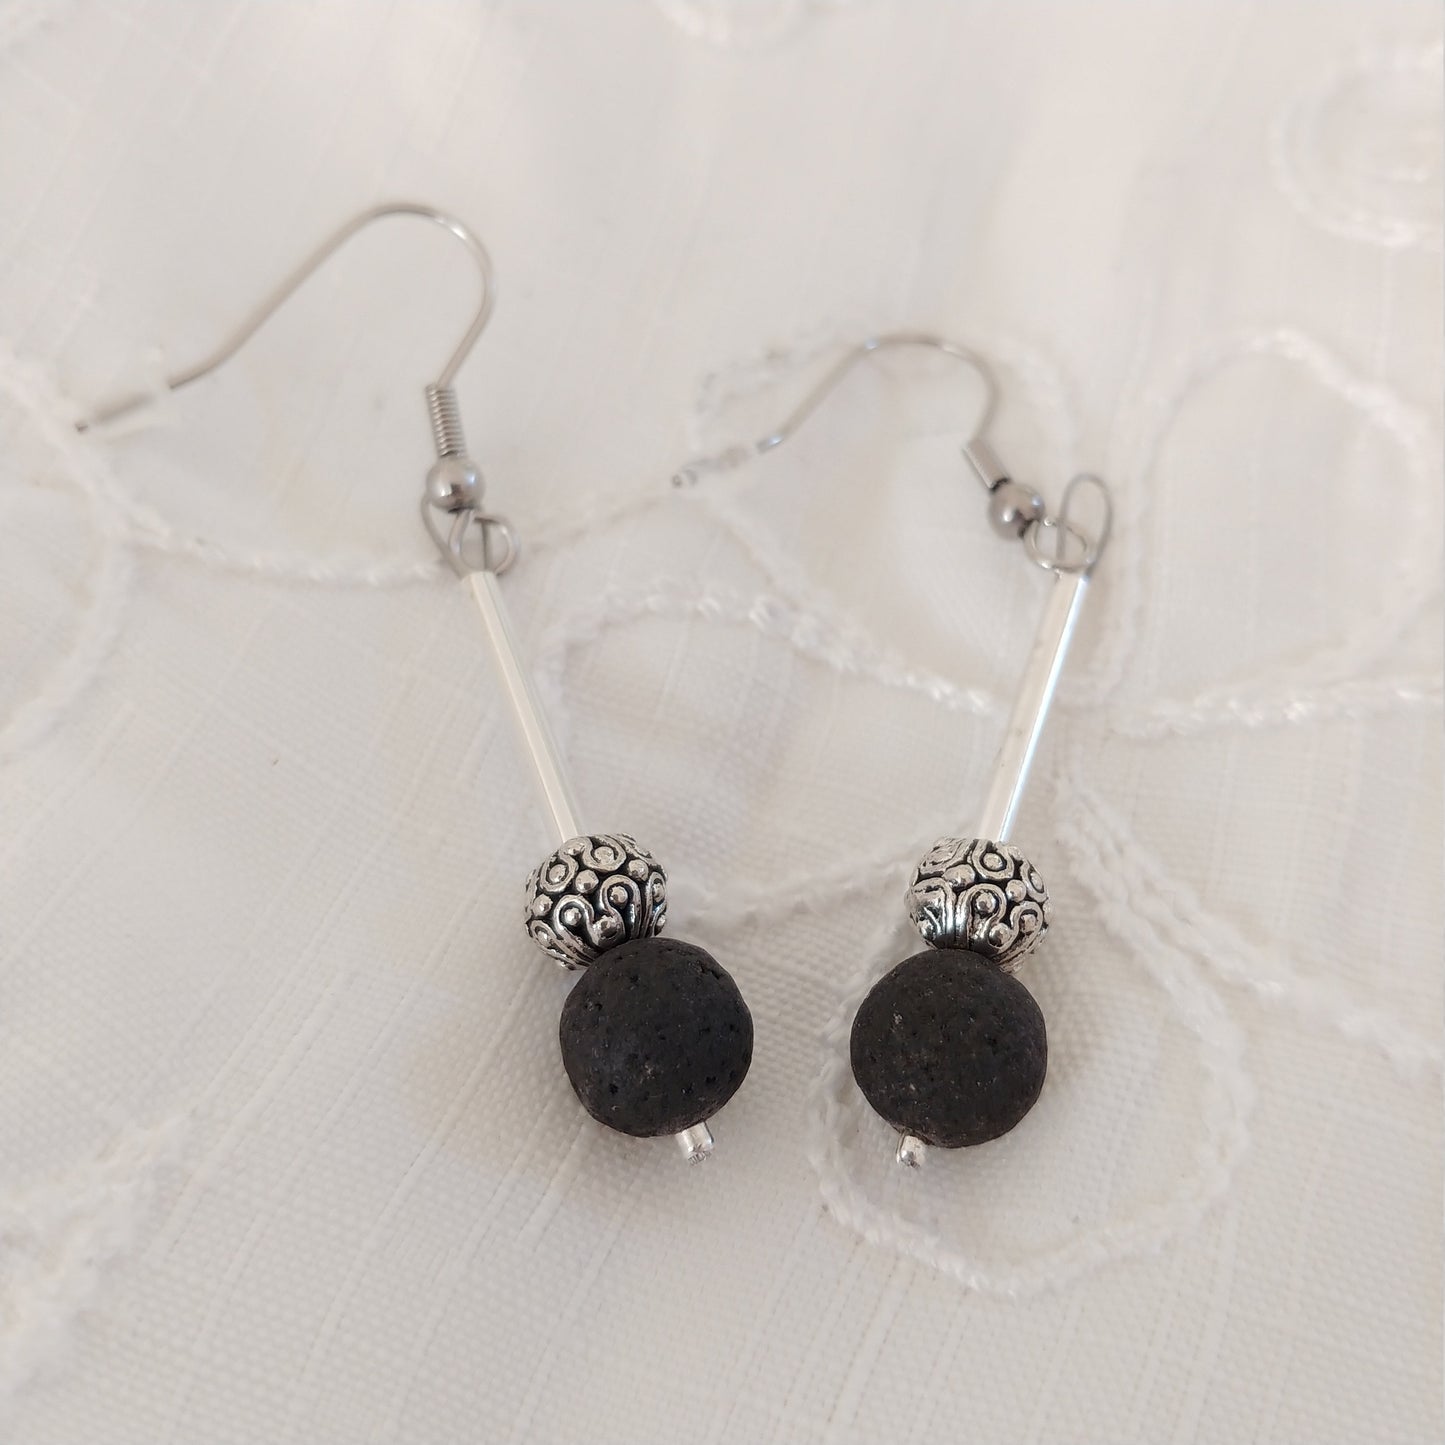 Lava Rock Silver Tube Earrings with Beautiful Round Spacer Bead